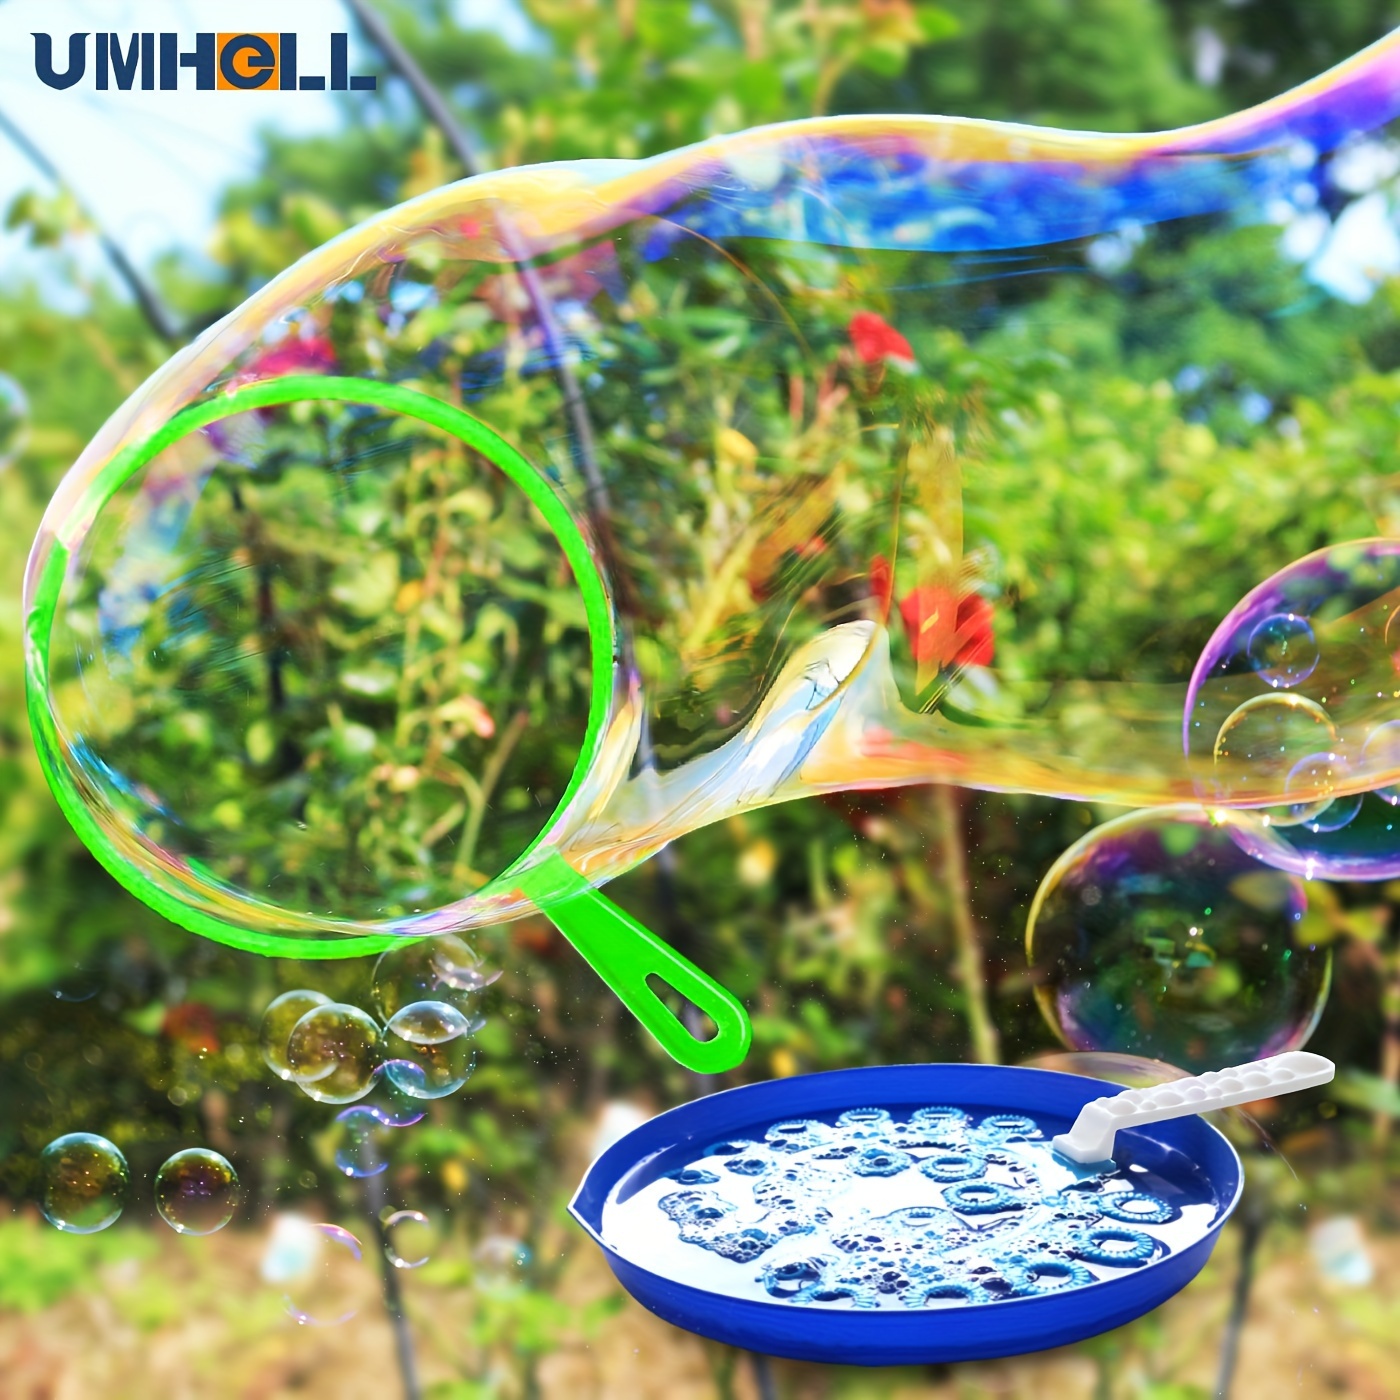 

Umhell Kids' Bubble Wand Set - Giant Fun Bubble Maker With Tray, Colorful Diy Outdoor Play & Family Activities, Easy Assembly, No Liquid Included